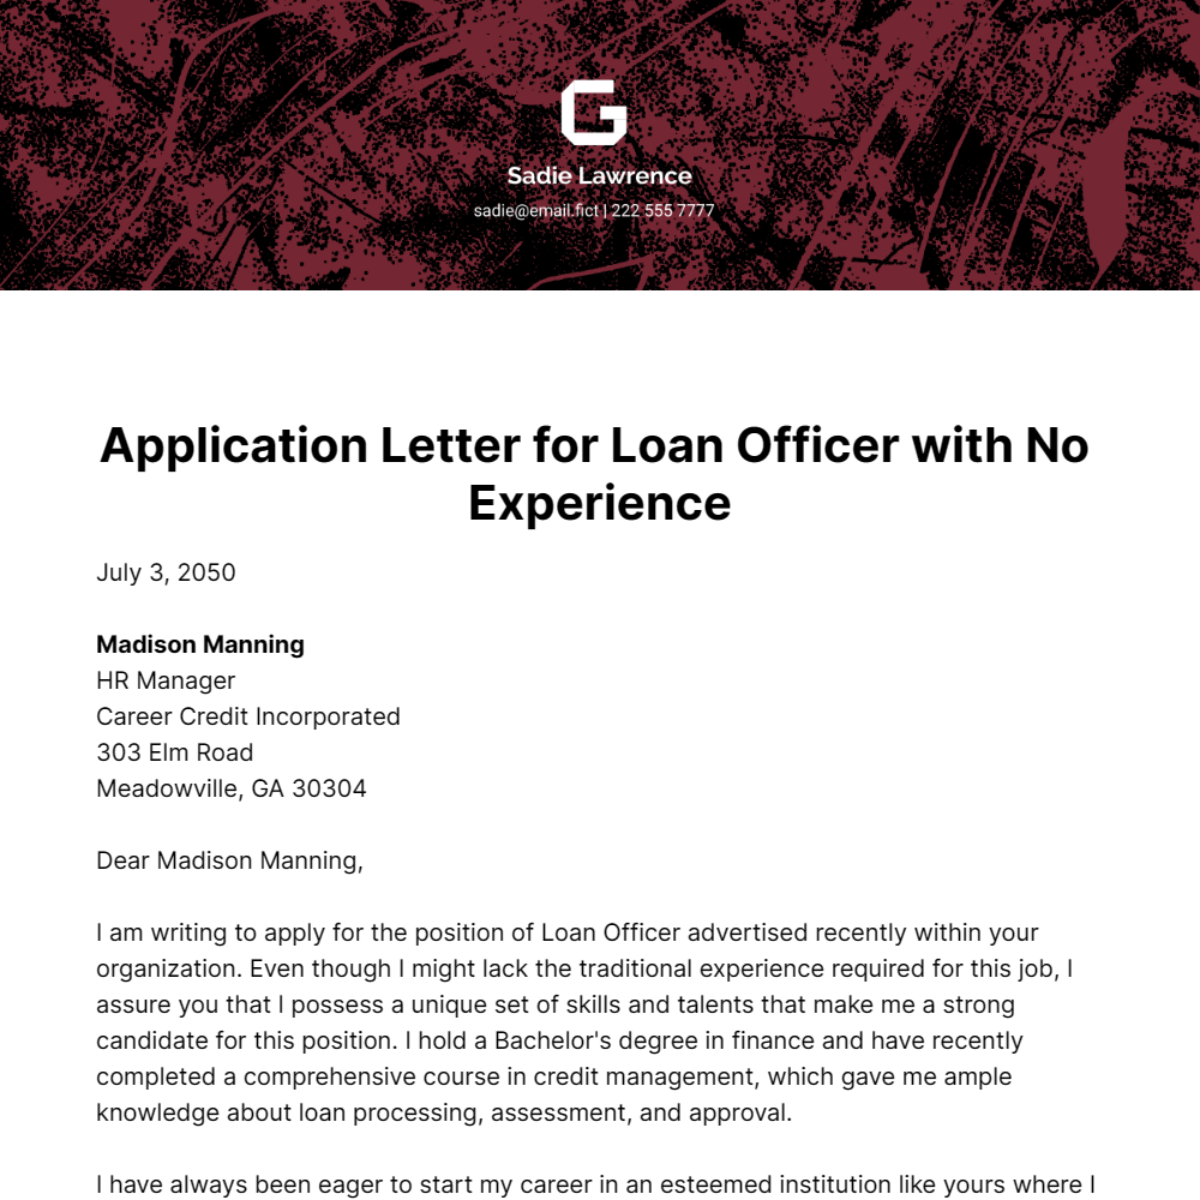 Application Letter for Loan Officer with No Experience Template